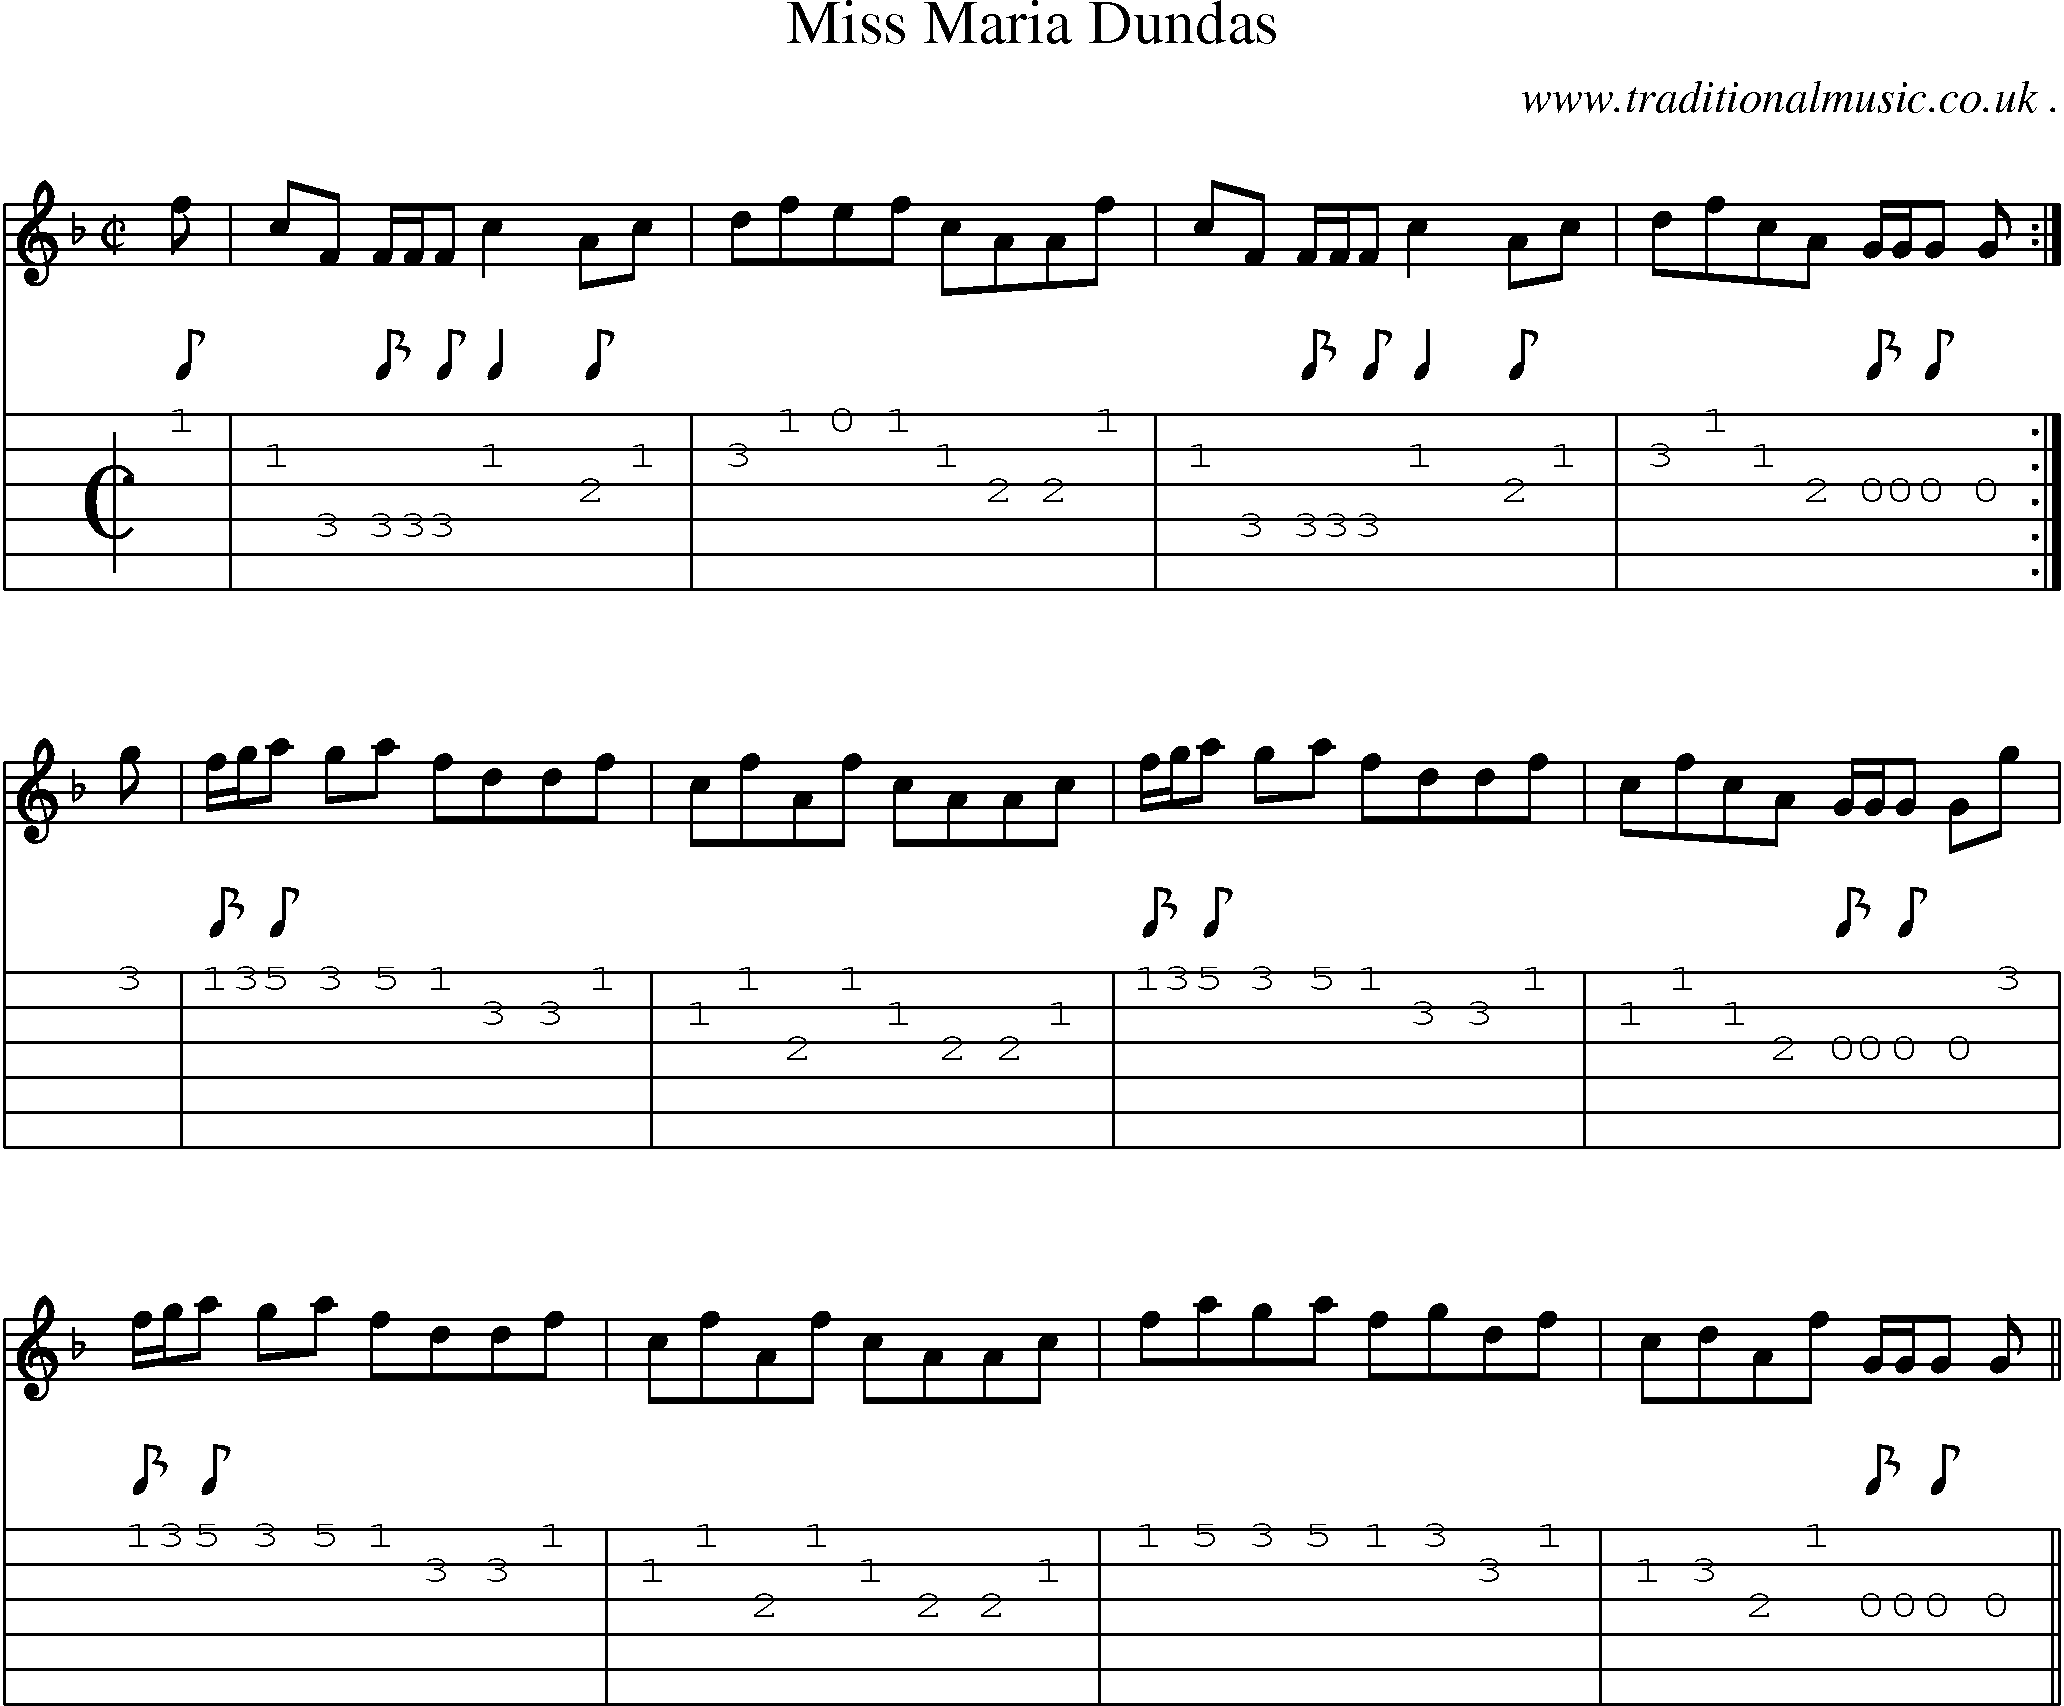 Sheet-music  score, Chords and Guitar Tabs for Miss Maria Dundas